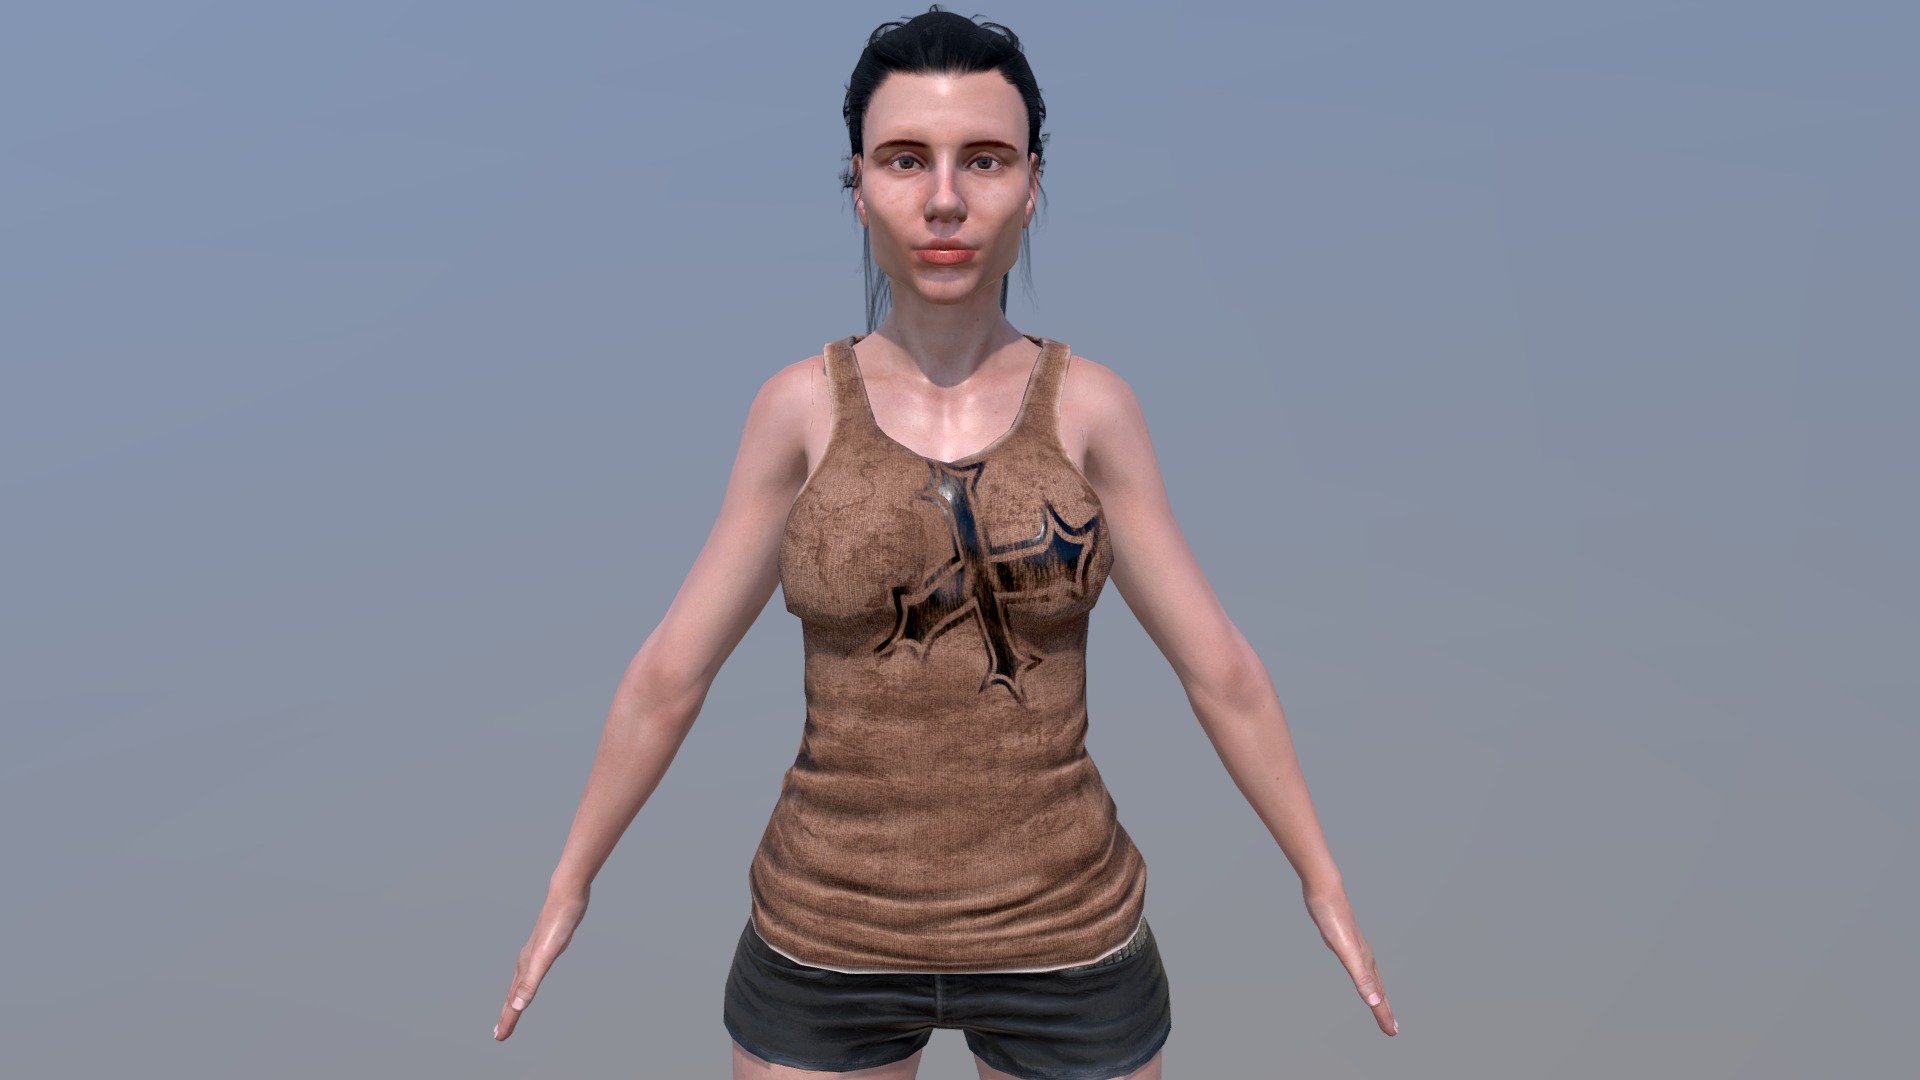 CAROLINE CHARACTER

IF YOU NEED MORE BASE MESH OR ANIMATED REALISTIC CHARACTERS PLEASE CHECK MY PROFILE.

* AVAILABLE FILE FORMATS  :-



3DS MAX   (.max)   ver- 2011



UNREAL ENGINE (.uproject)  ver- 4.19



UNITY 3D  (.unity package)  ver - 2018



MAYA   (.ma , .mb)  ver-2014



CINEMA 4D  (.c4d)     ver- R19      



BLENDER  (.blend)     ver- 2.9



.obj , .mtl



.fbx



* MORPH CONTROLS:-



68 FACE  CONTROLS



07 TONGUE  CONTROLS



- NOTES



MAIN PRODUCT IS HIGH POLY MODEL



ALSO INCLUDED LOW POLY GAME BASE MODEL ONLY IN FBX FORMAT 



PBR TEXTURES USED



RIGGED , ANIMATED , UV MAPED , 



PBR TEXTURES NOT APPLIED IN SOME FILE FORMATS



NO ADDITIONAL PLUGINS USED



- POLYGONS


HIGH POLY MODEL*

27856(POLY)&mdash;44313(TRI)----24530(VERT)&mdash;   



LOW POLY MODEL*

17307(POLY)&mdash;17593(TRI)----10594(VERT)&mdash;





![] - CAROLINE CHARACTER - Buy Royalty Free 3D model by jasirkt 3d model